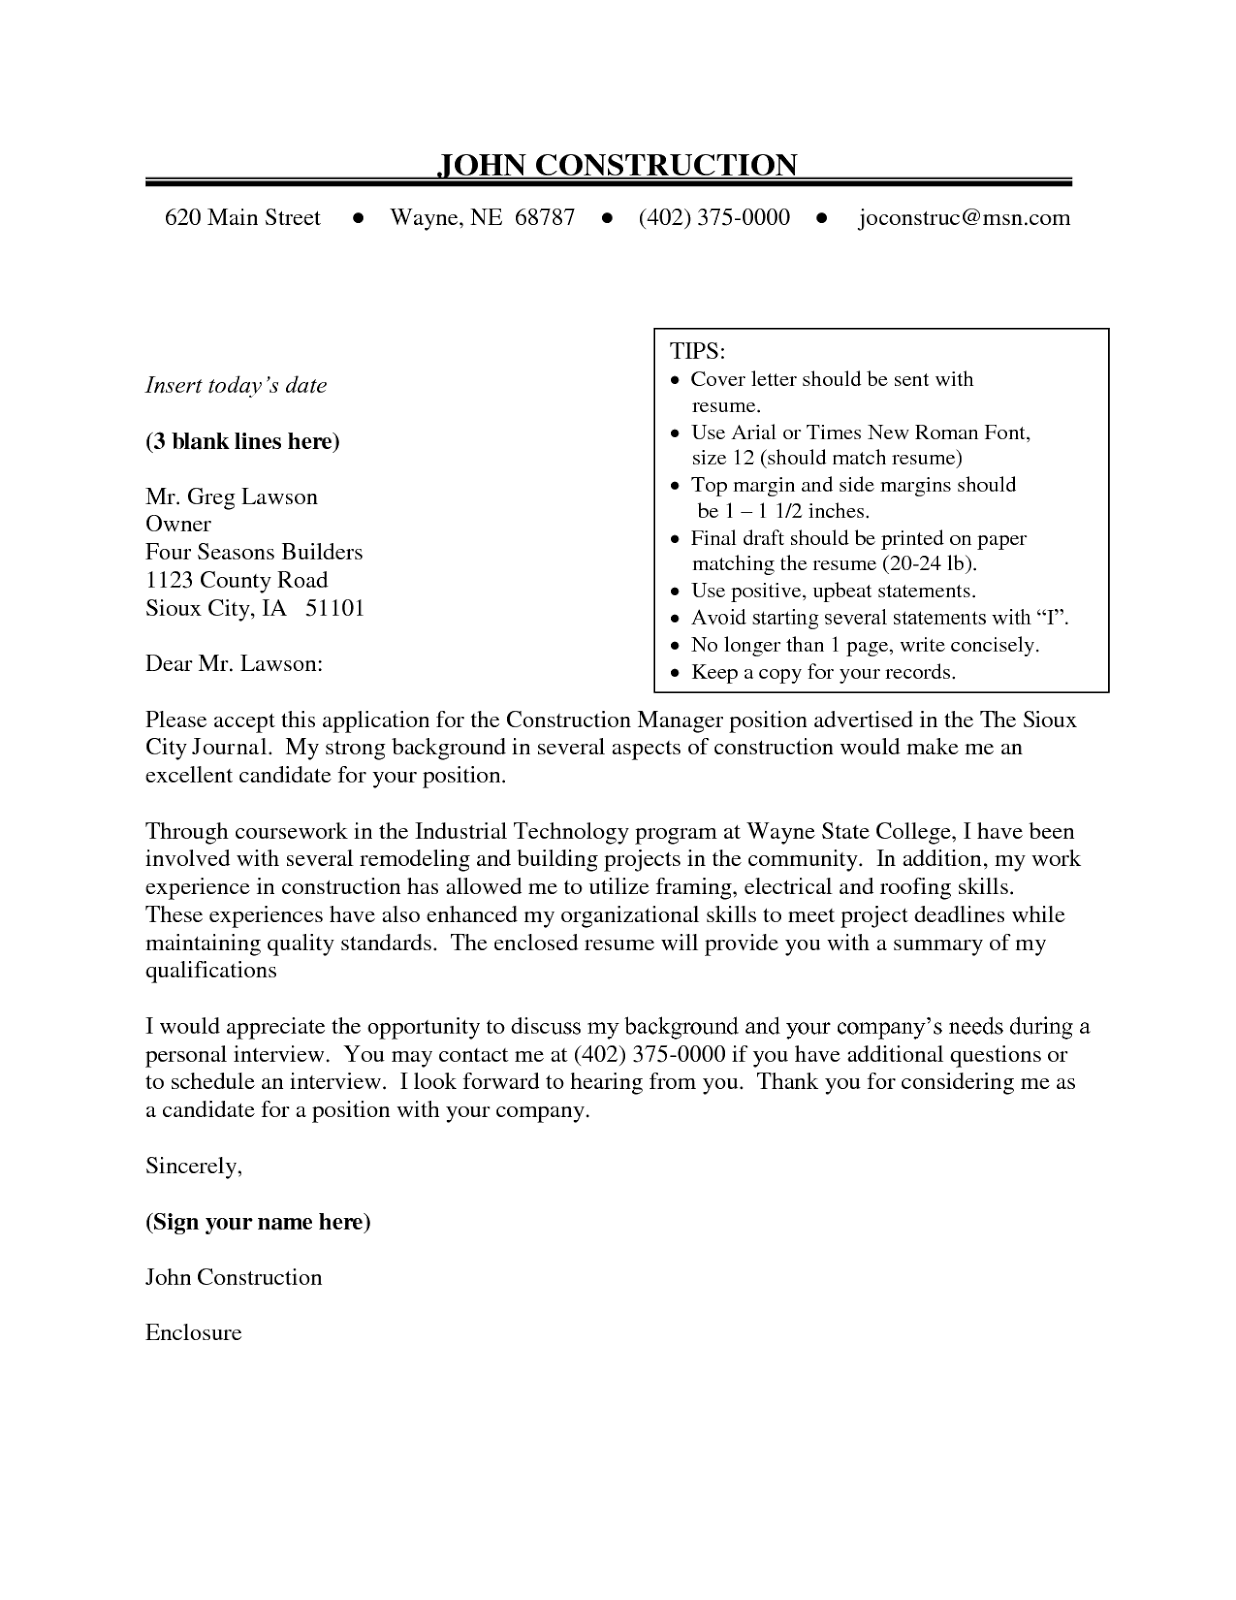 Cover letter opening sentence examples